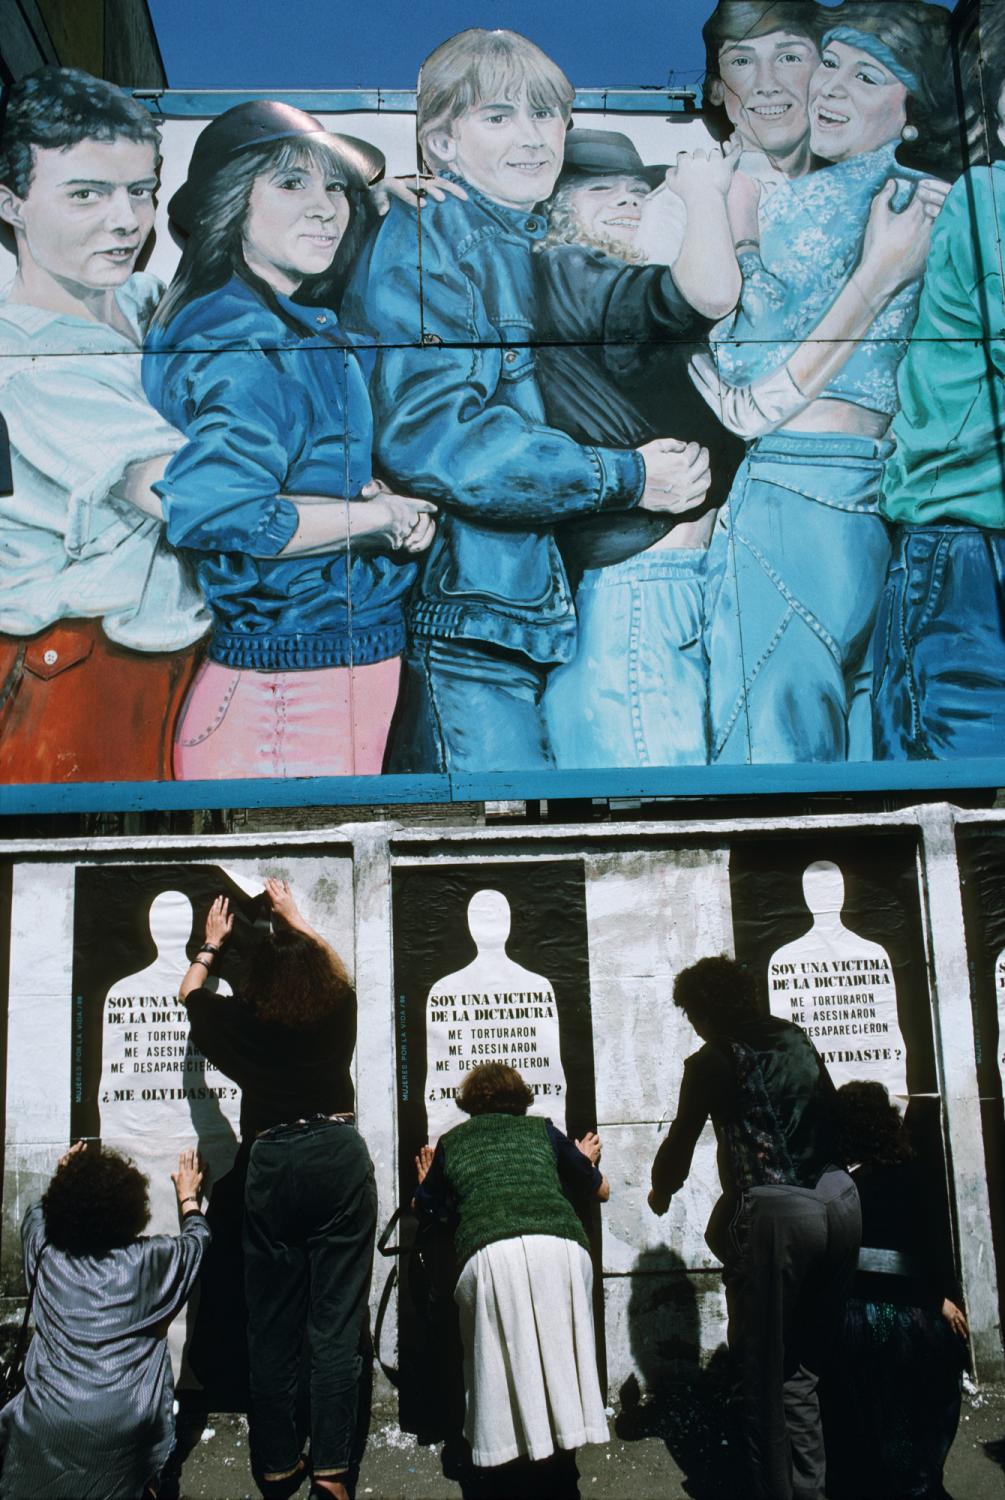 Families of &quot;desaparecidos&quot; (the disappeared) put up posters on walls in...